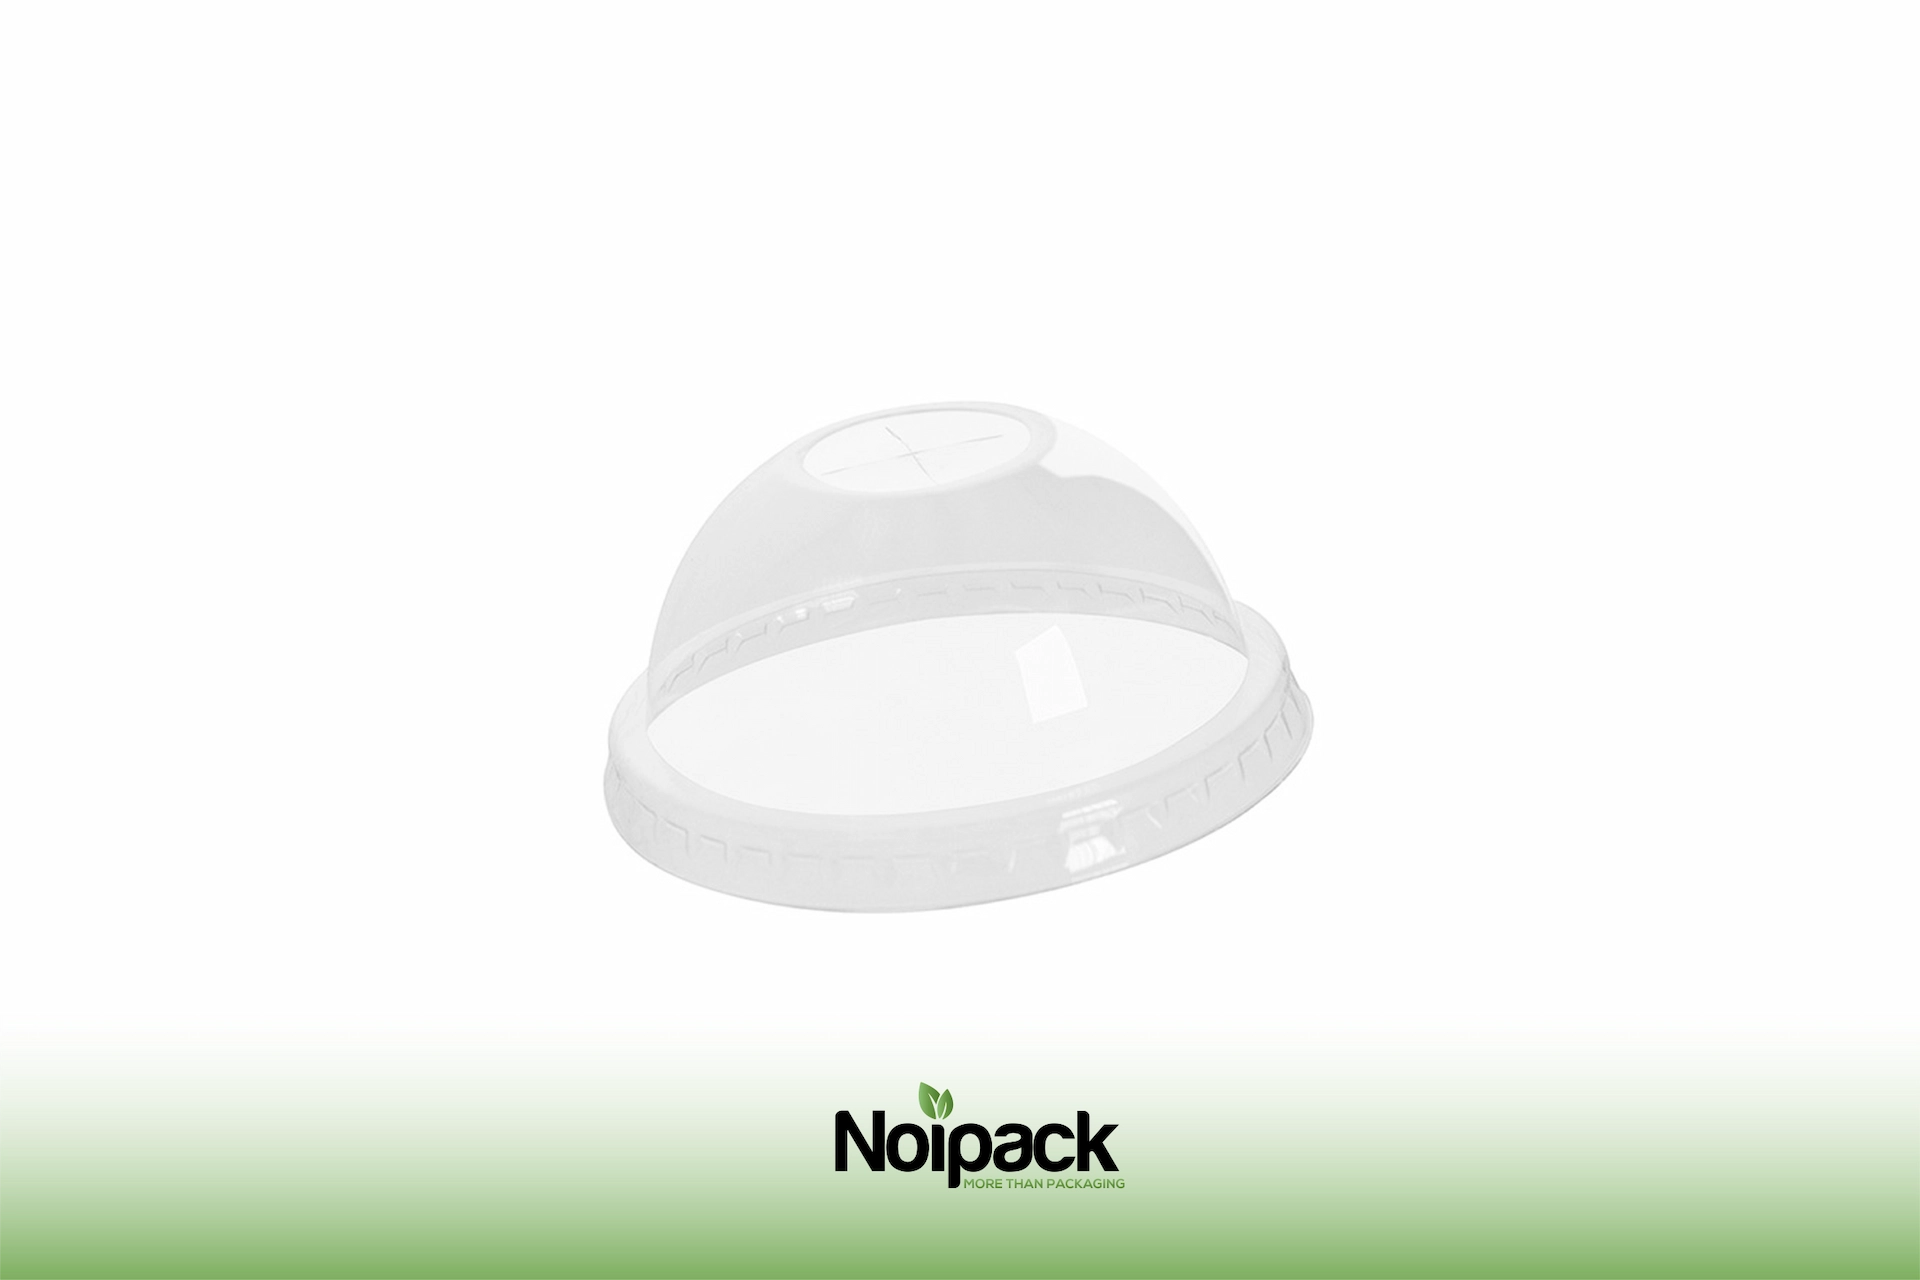 Noipack dome lid 200-250ml PET